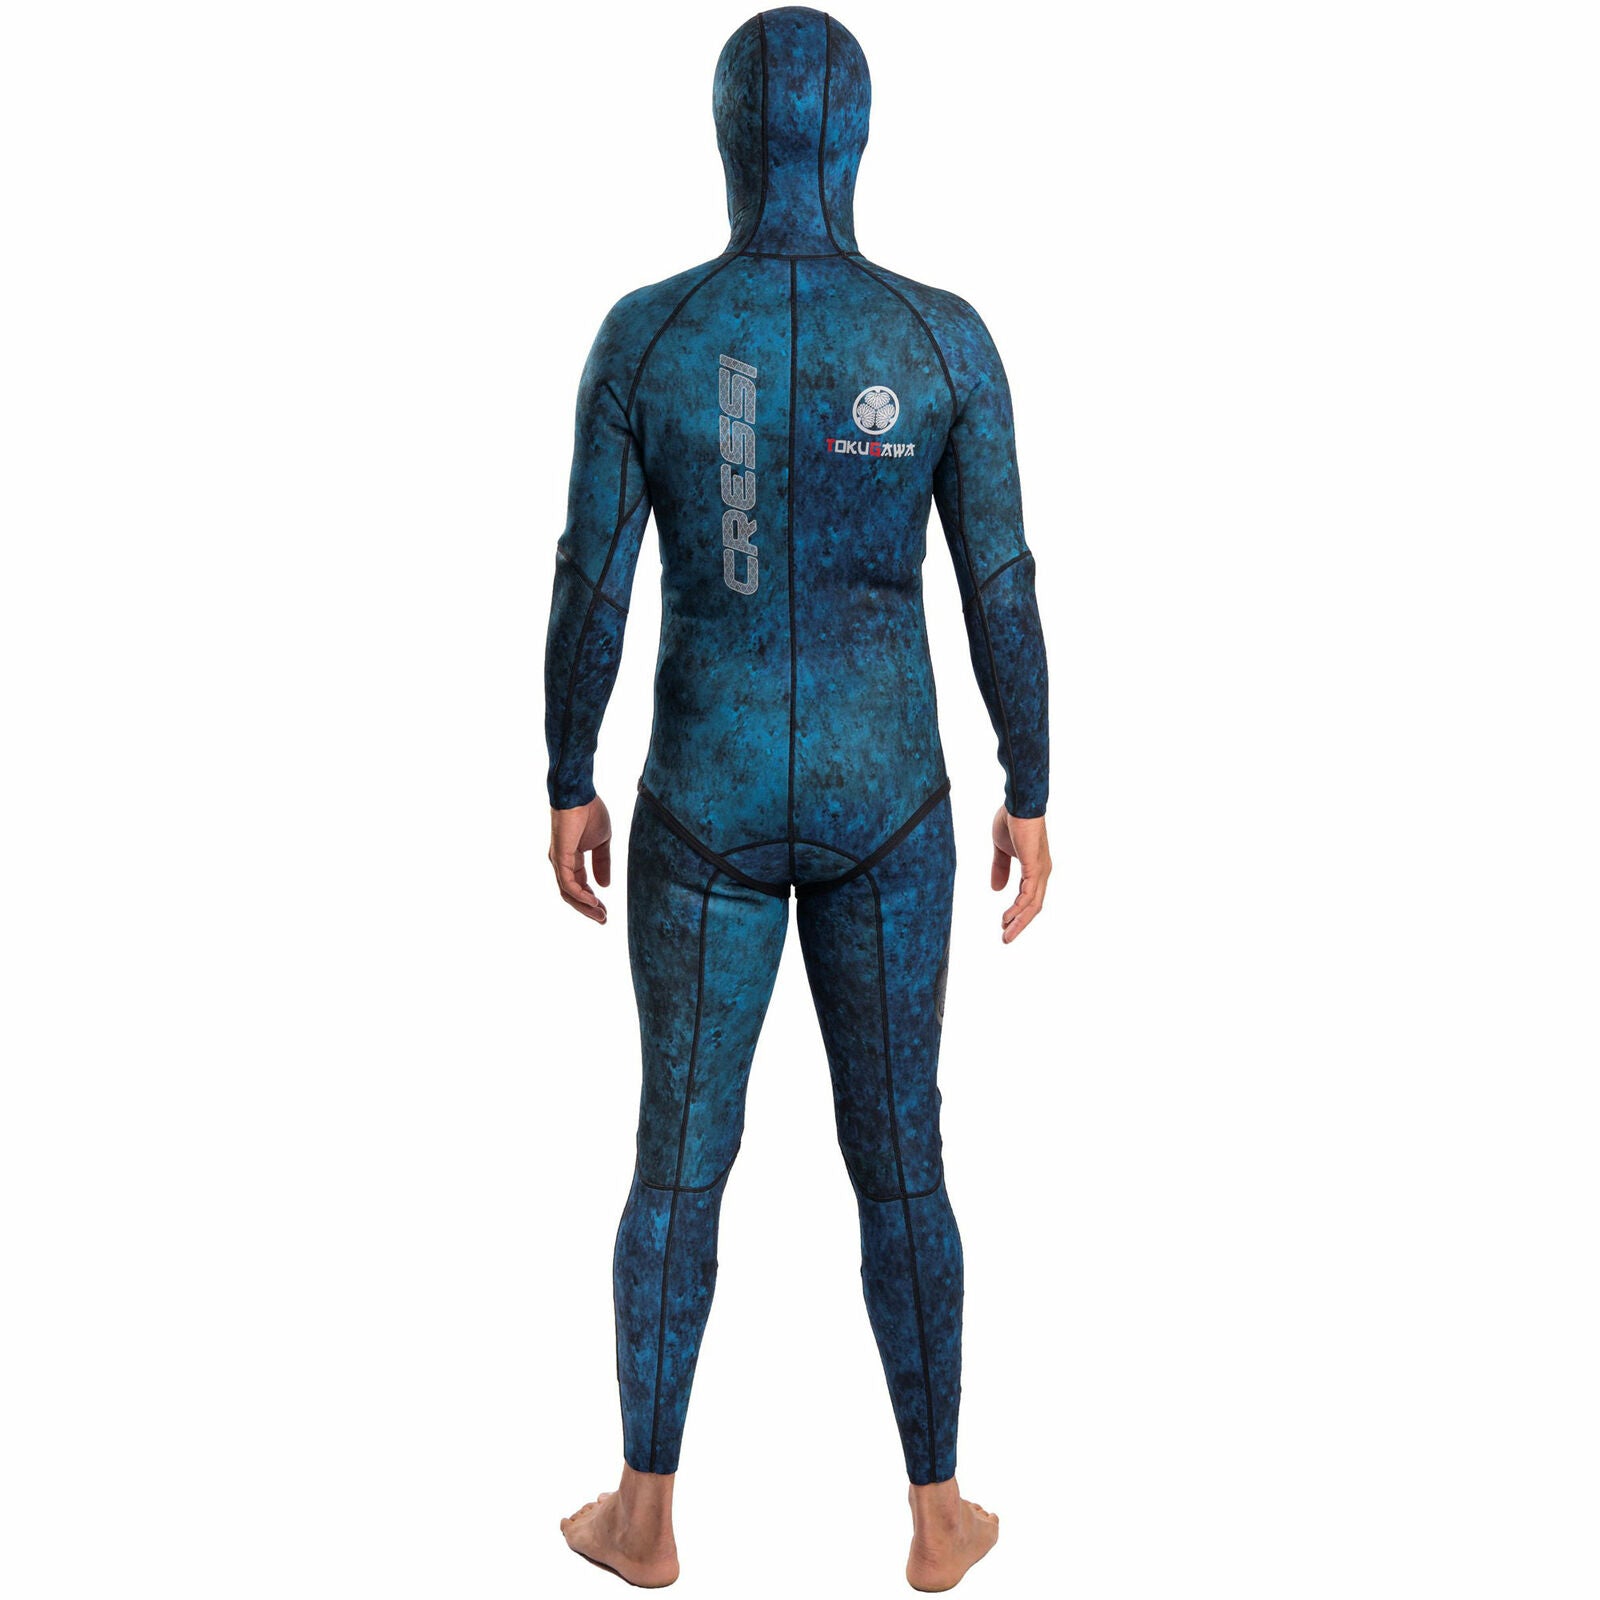 Cressi Tokugawa 2mm Nylon Lined Wetsuit – Lost Winds Dive Shop